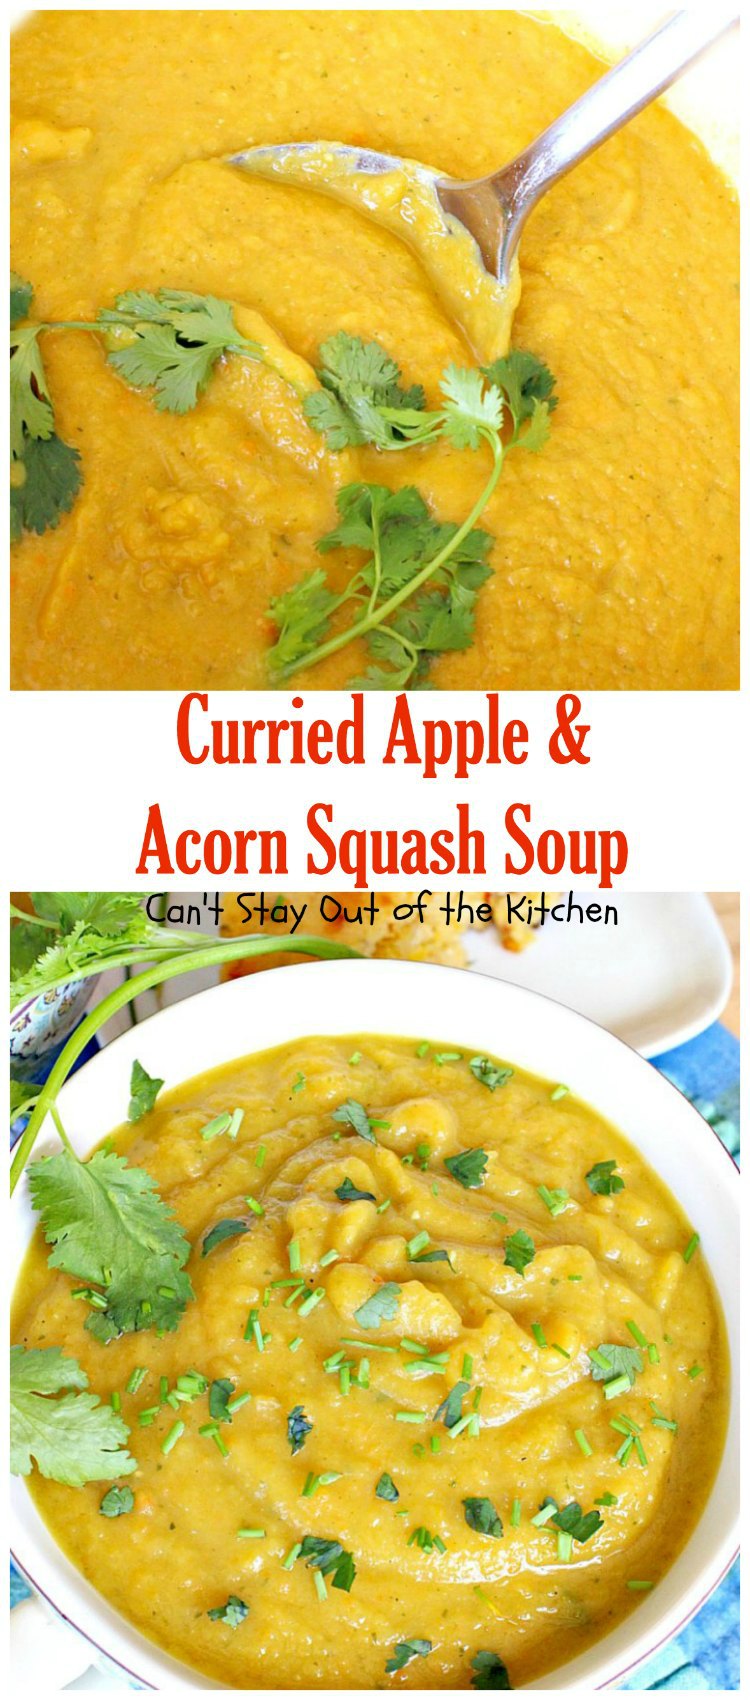 Curried Apple & Acorn Squash Soup | Can't Stay Out of the Kitchen